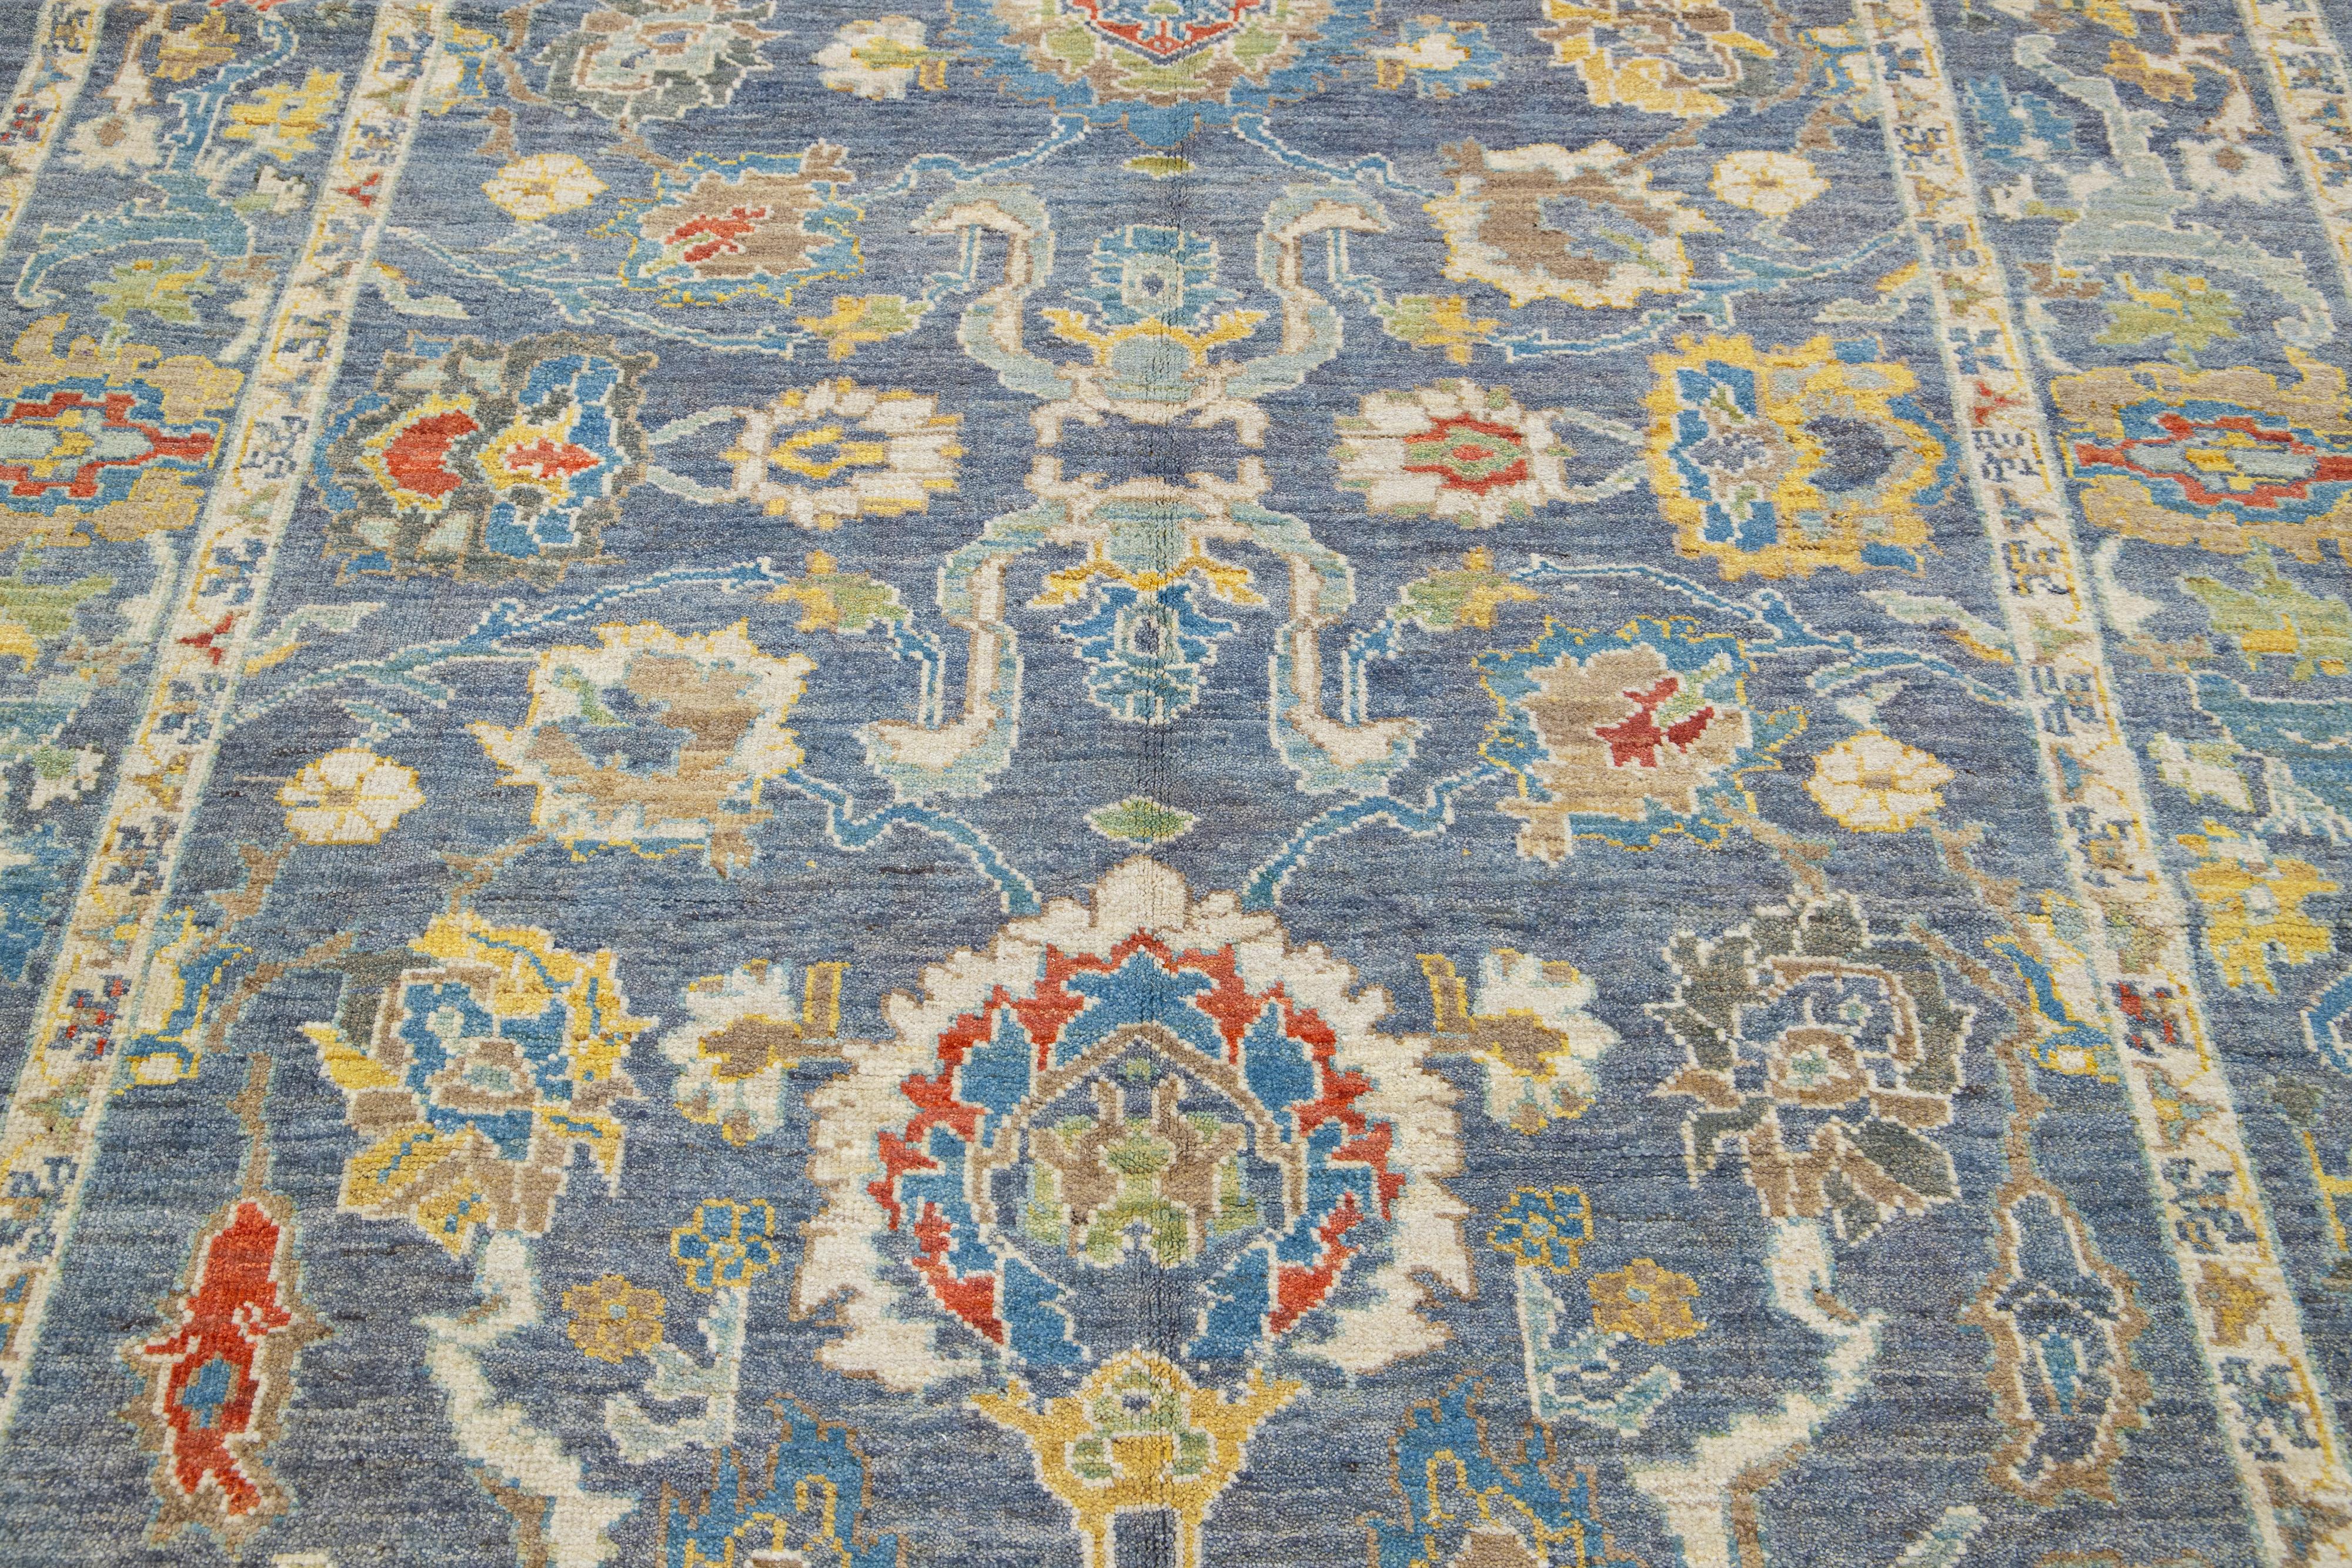 Modern Sultanabad Handmade Wool Rug Allover Floral In Blue In New Condition For Sale In Norwalk, CT